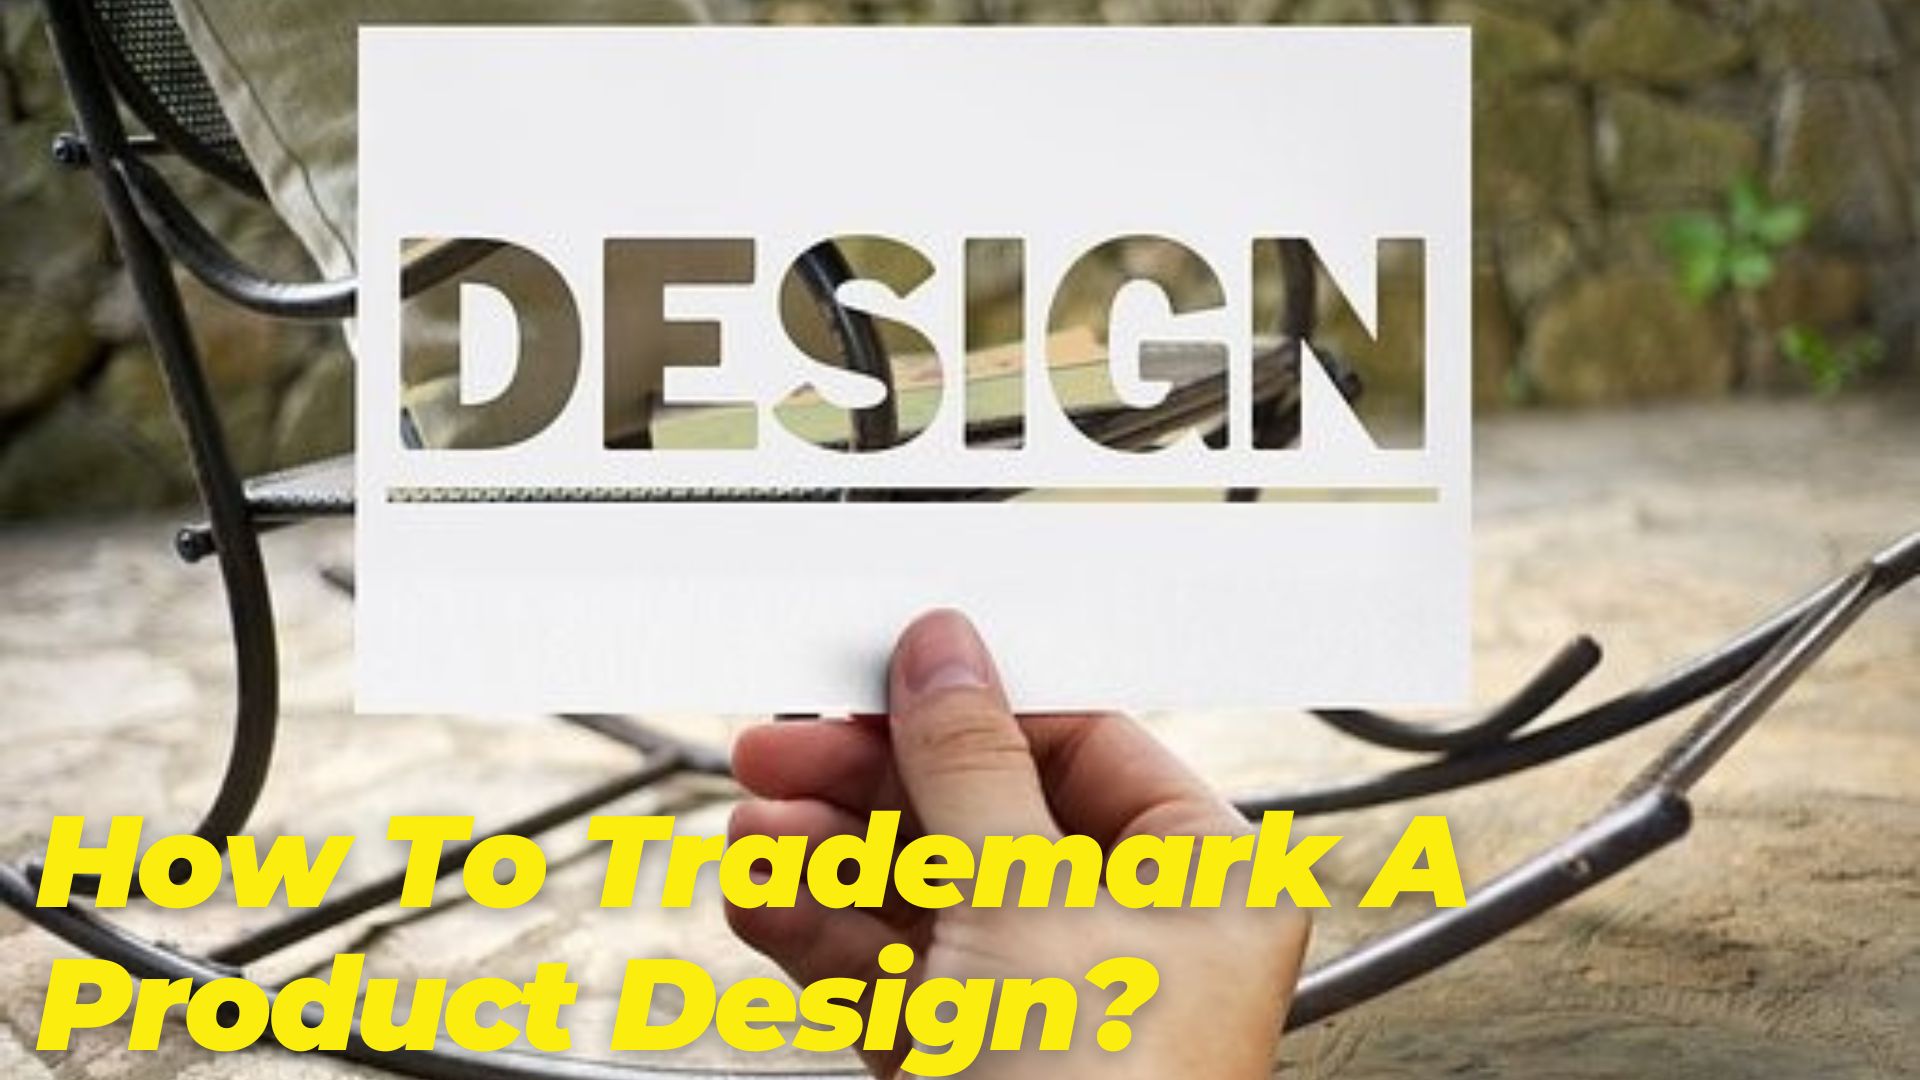 How To Trademark A Product Design?